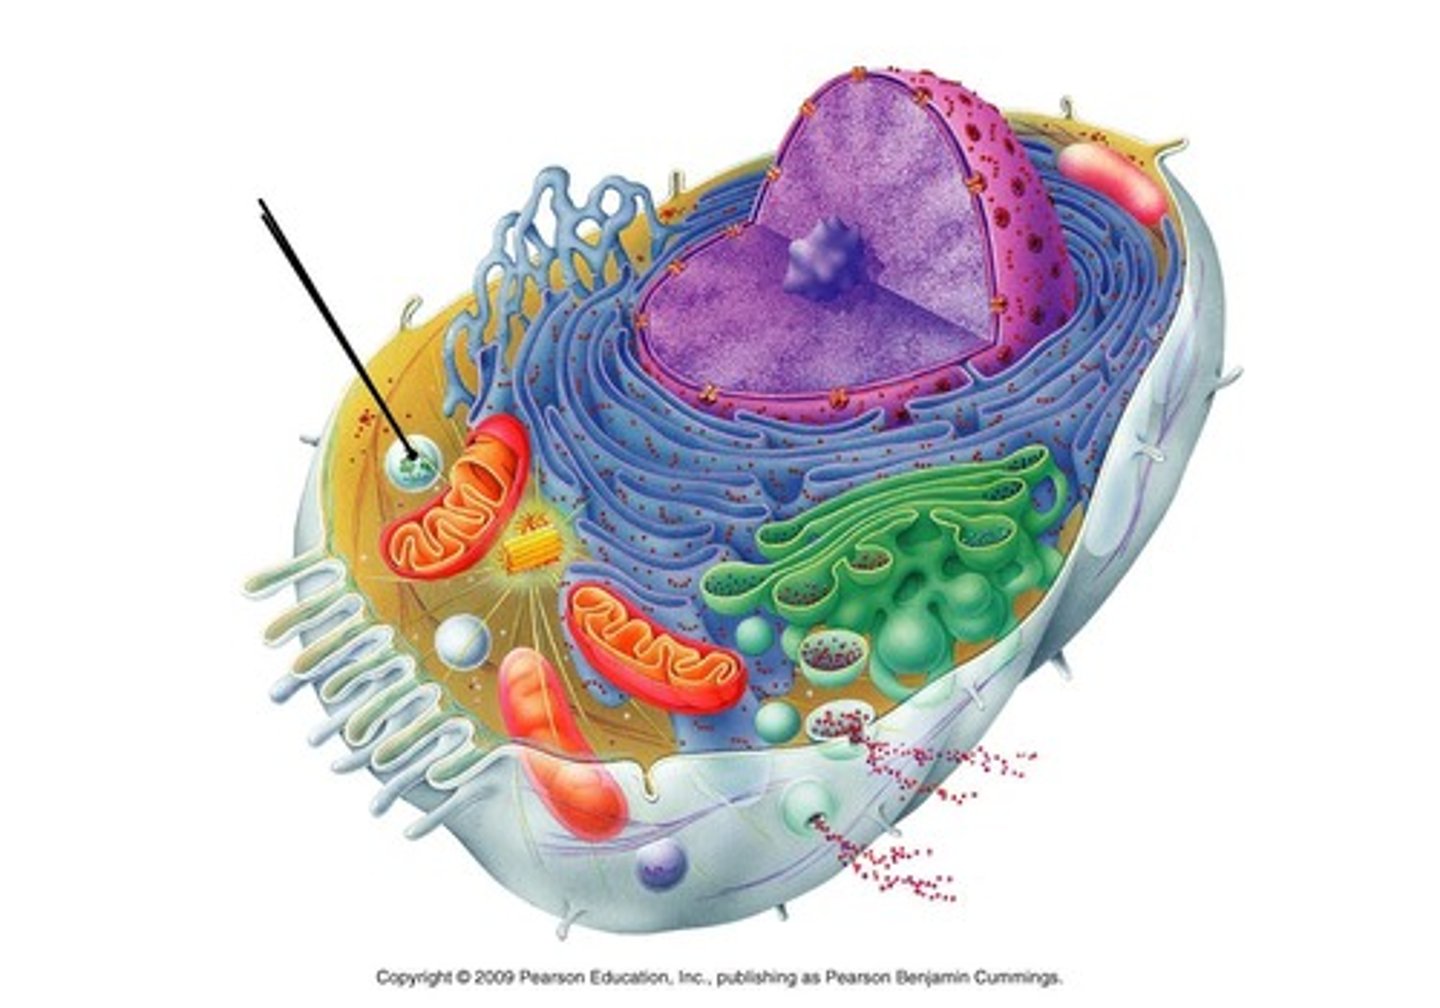 <p>vesicle that digests (hydrolyze) and breakdowns materials of excess, old or worn out cell structures</p>